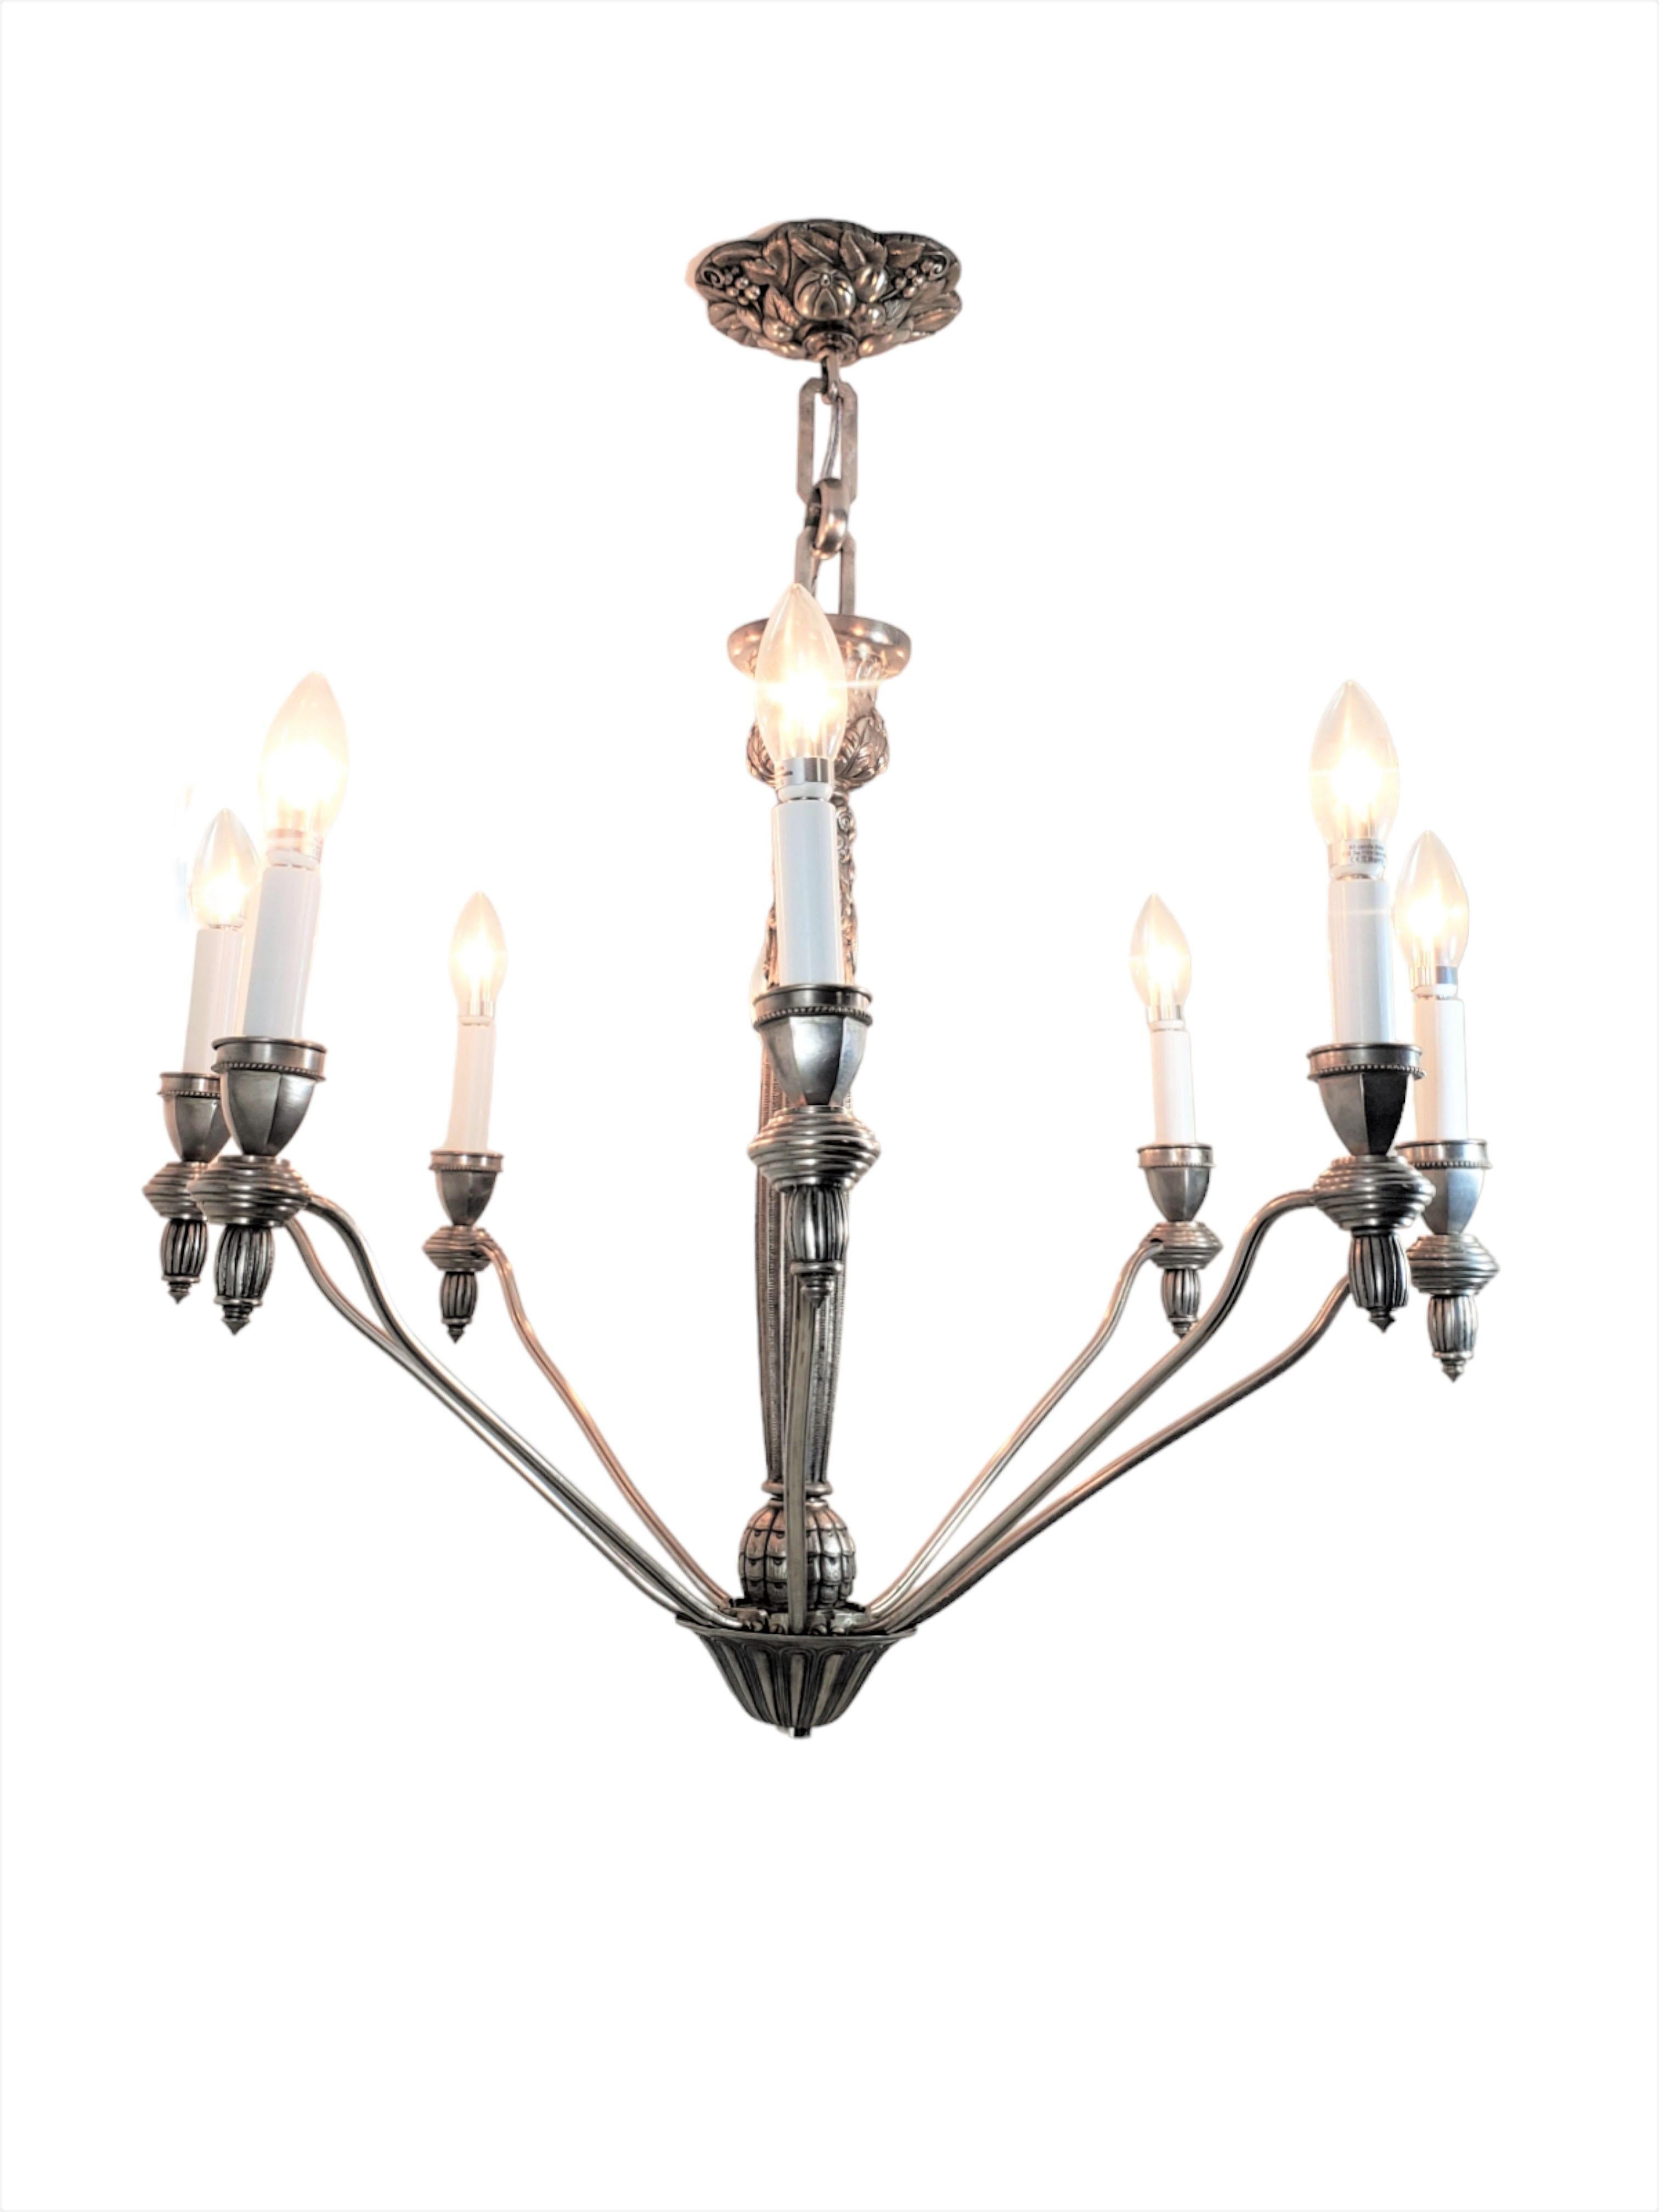 French eight arm heavily cast and detailed nickeled bronze chandelier - G.Capon  For Sale 8